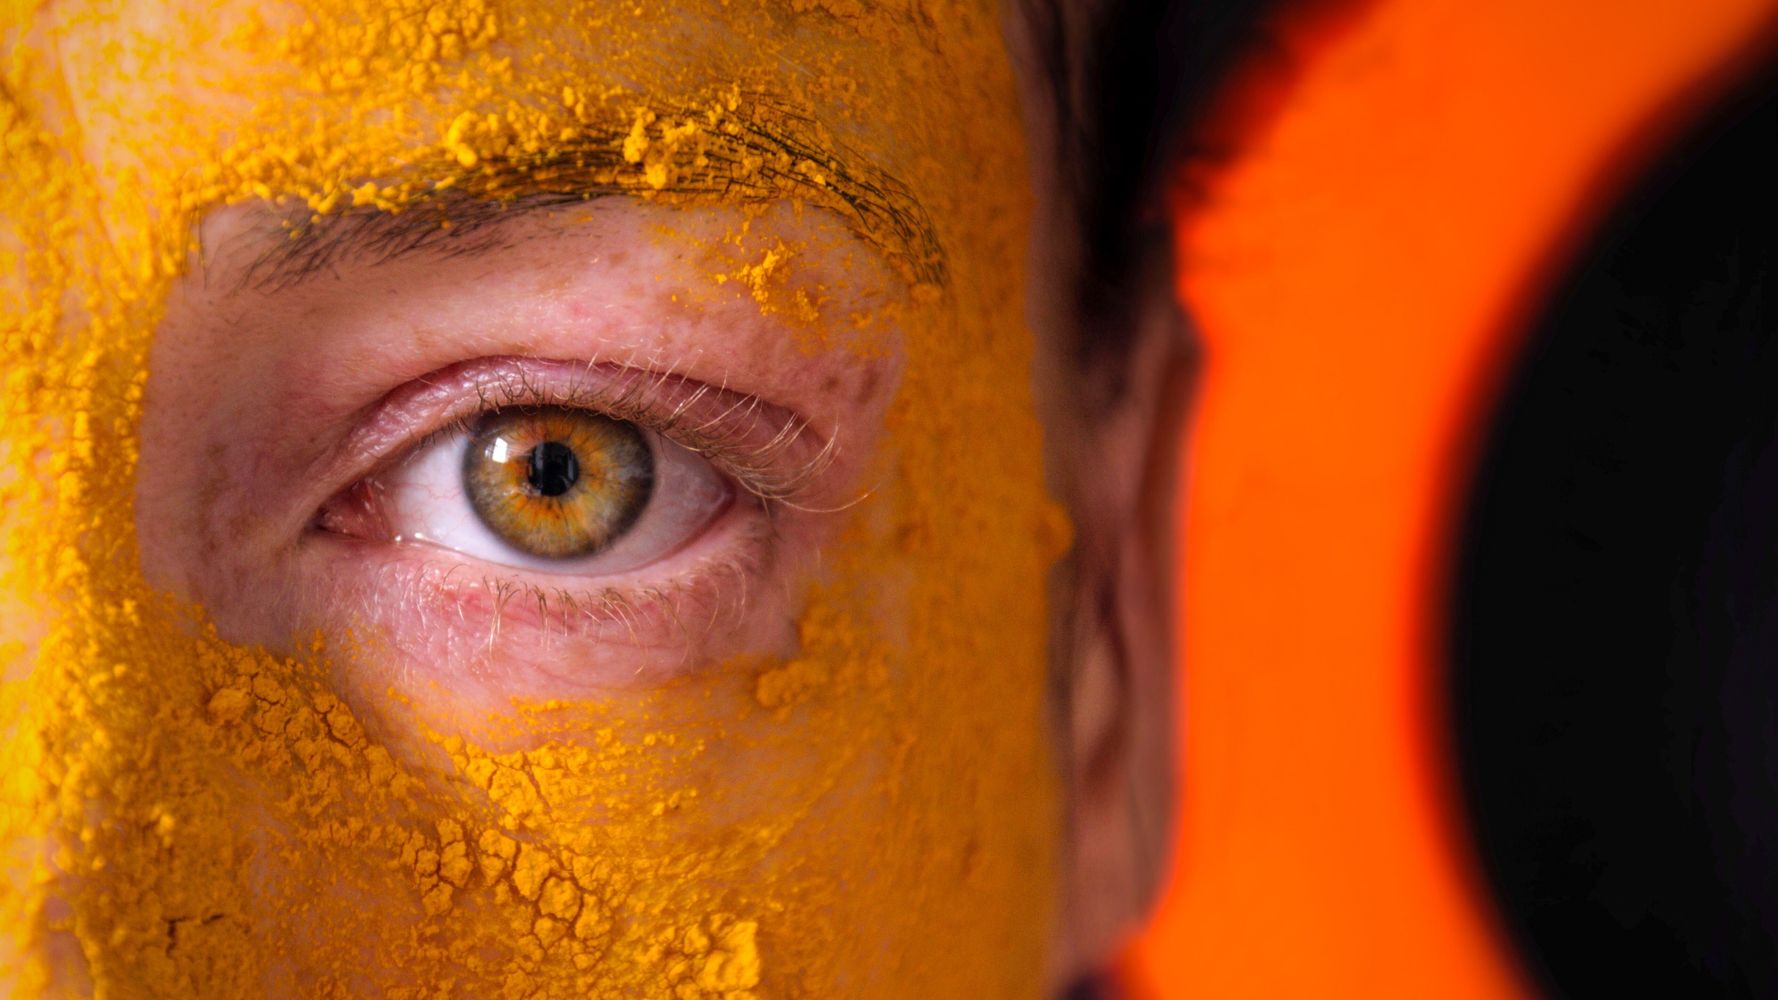 What Are The Skin Care Benefits And Limitations Of Turmeric?